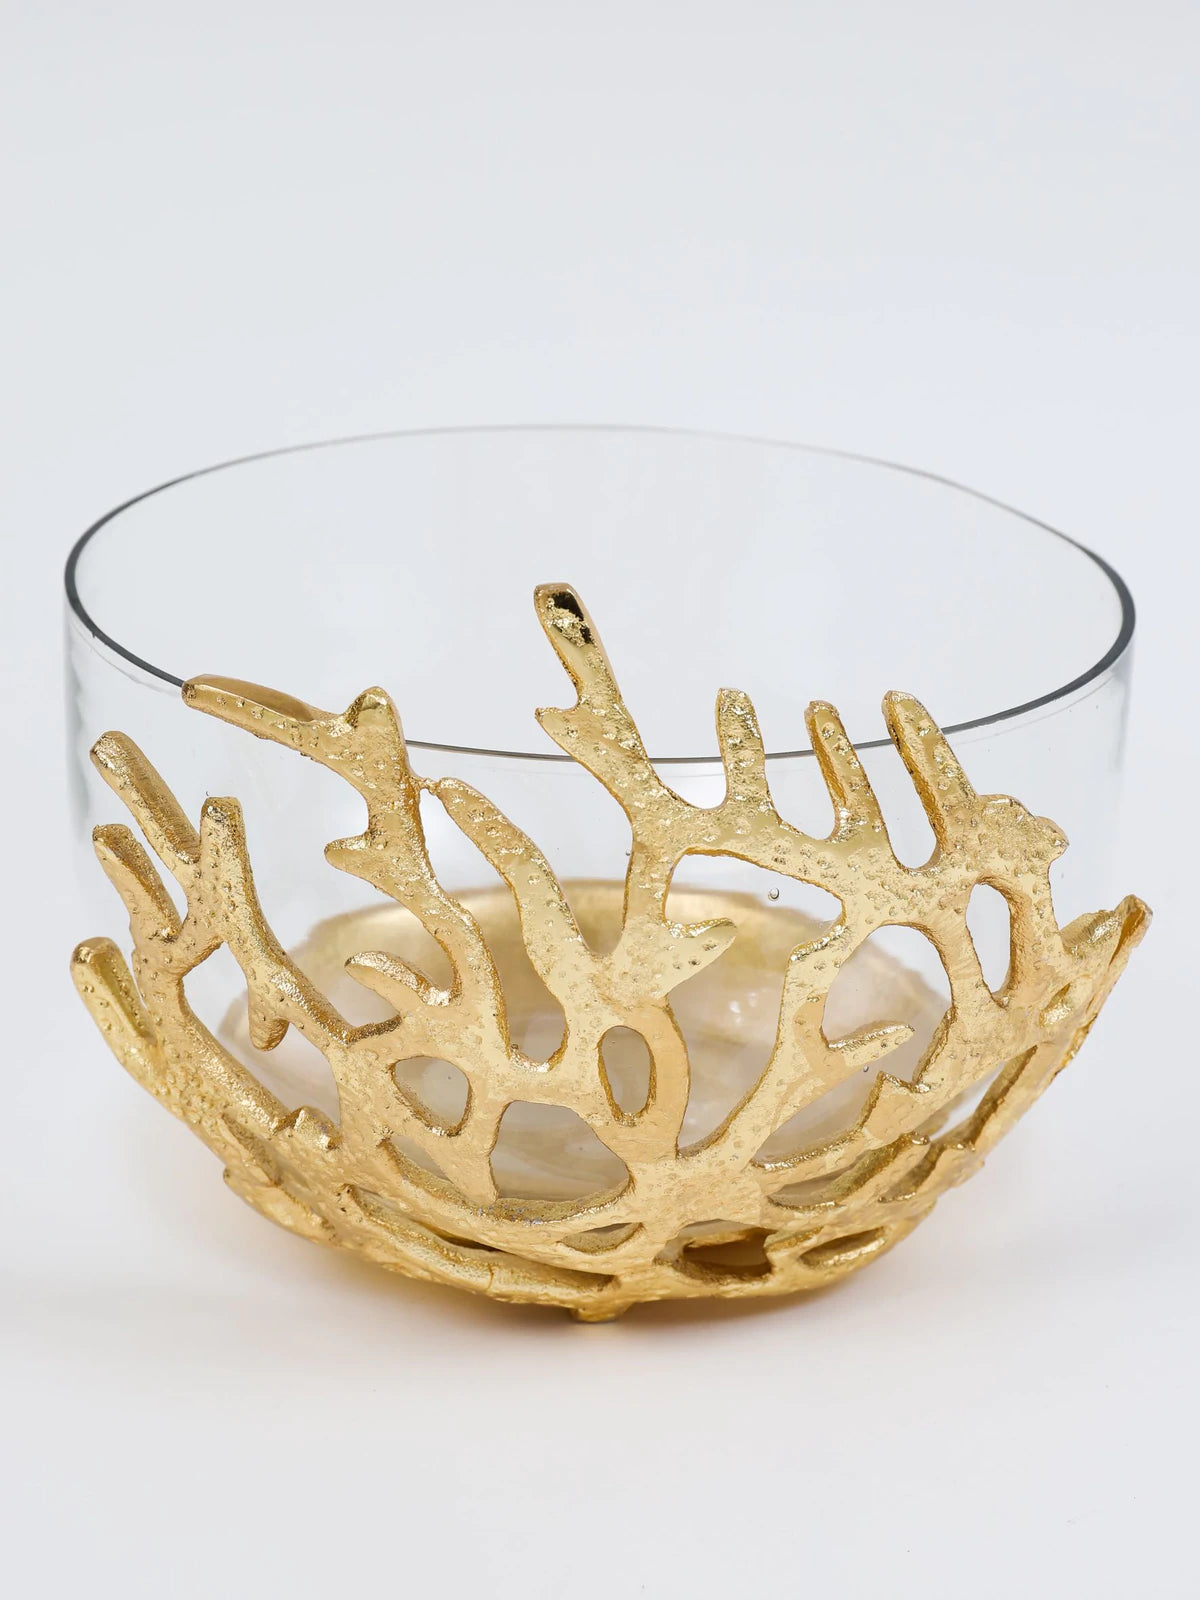 Glass Bowl with Gold Branch Design, Large Size.